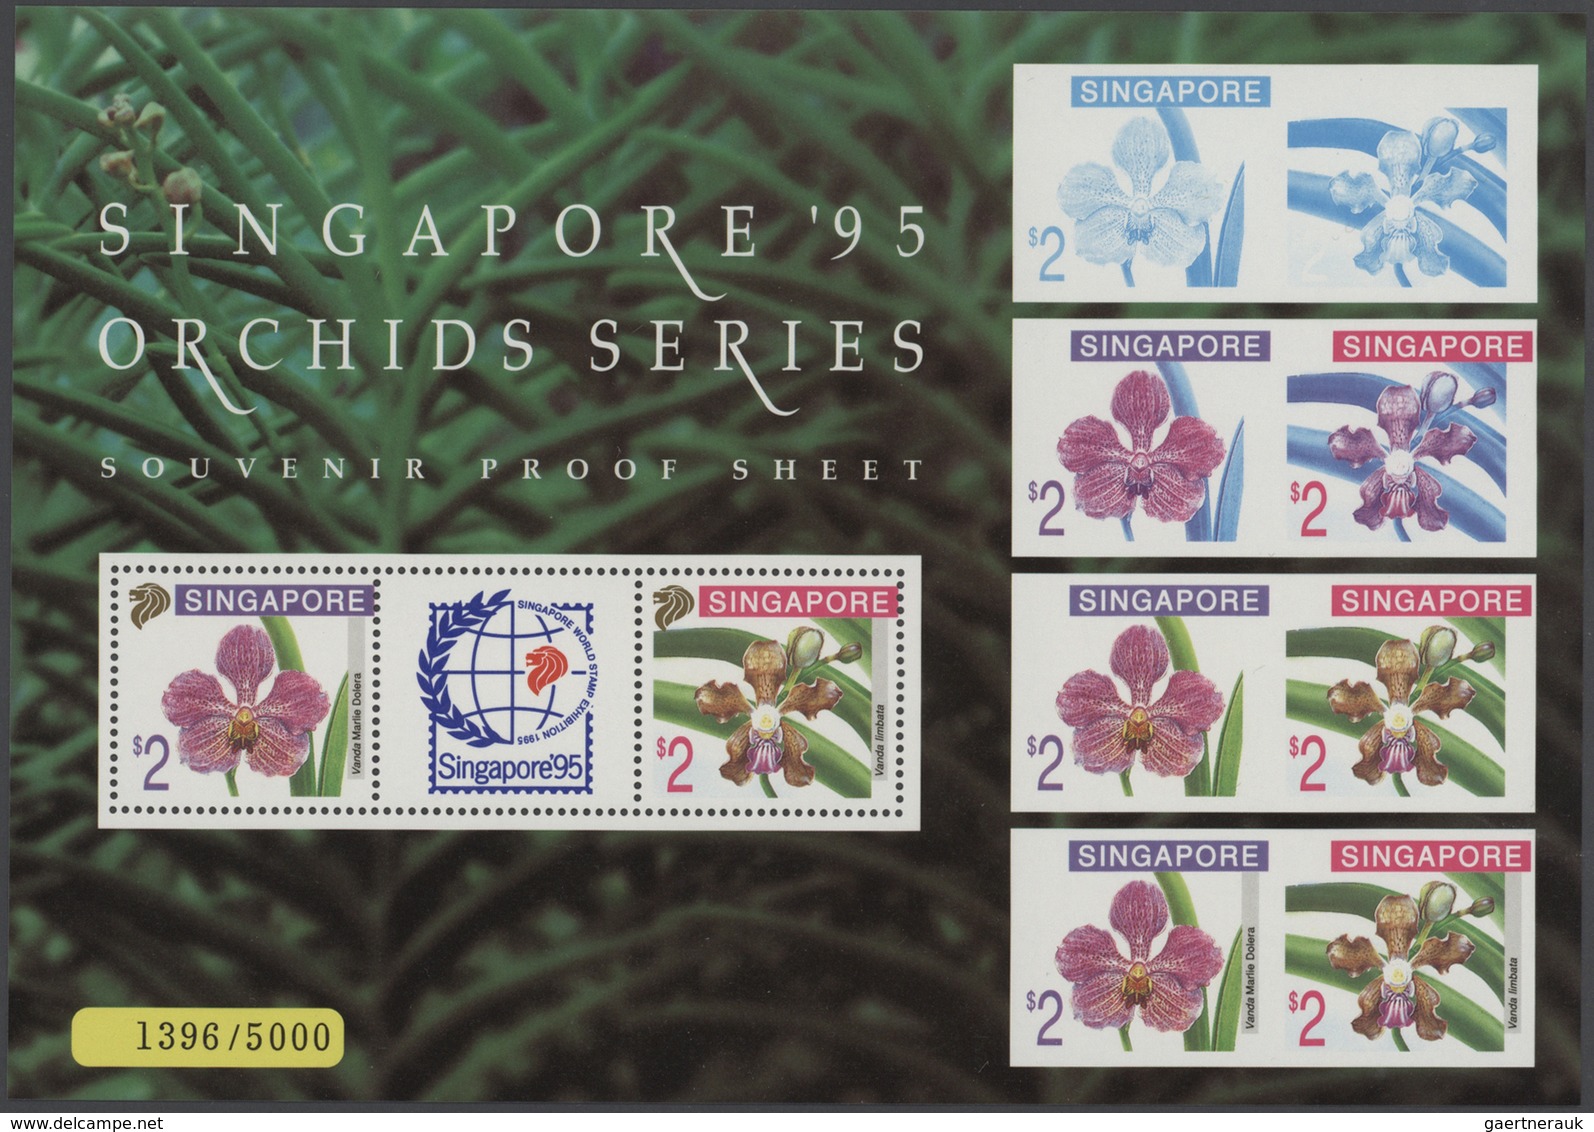 Singapur: 1991/1995, Stamp Exhibition SINGAPORE '95 ("Orchids"), Lot Of 20 Presentation Folders With - Singapore (...-1959)